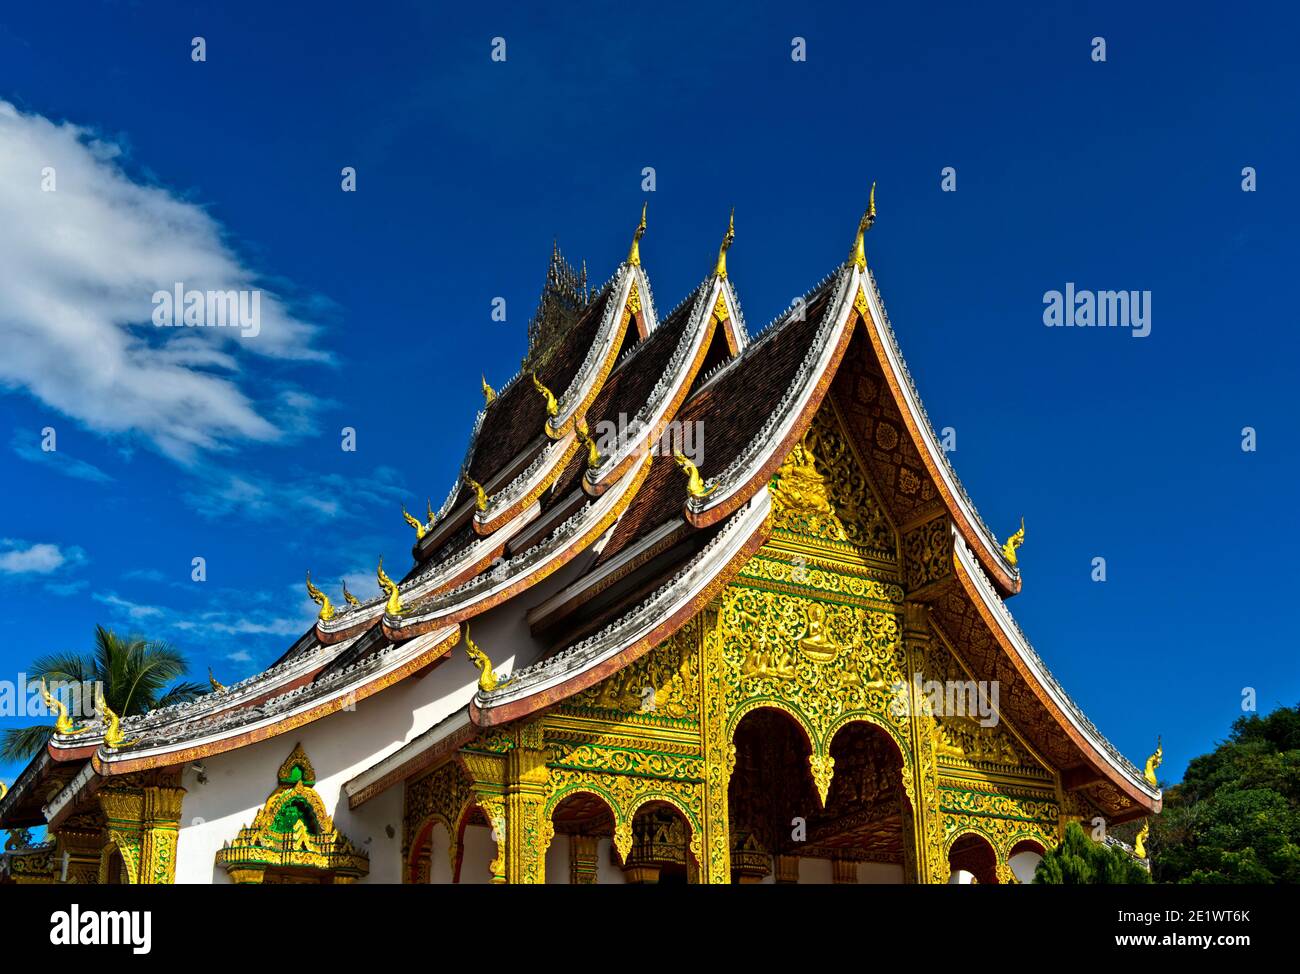 Multi-tiered roof in Thai style adorned with stylized Naga finials at the ends of the roof, Haw Pha Bang temple,  Luang Prabang, Laos Stock Photo